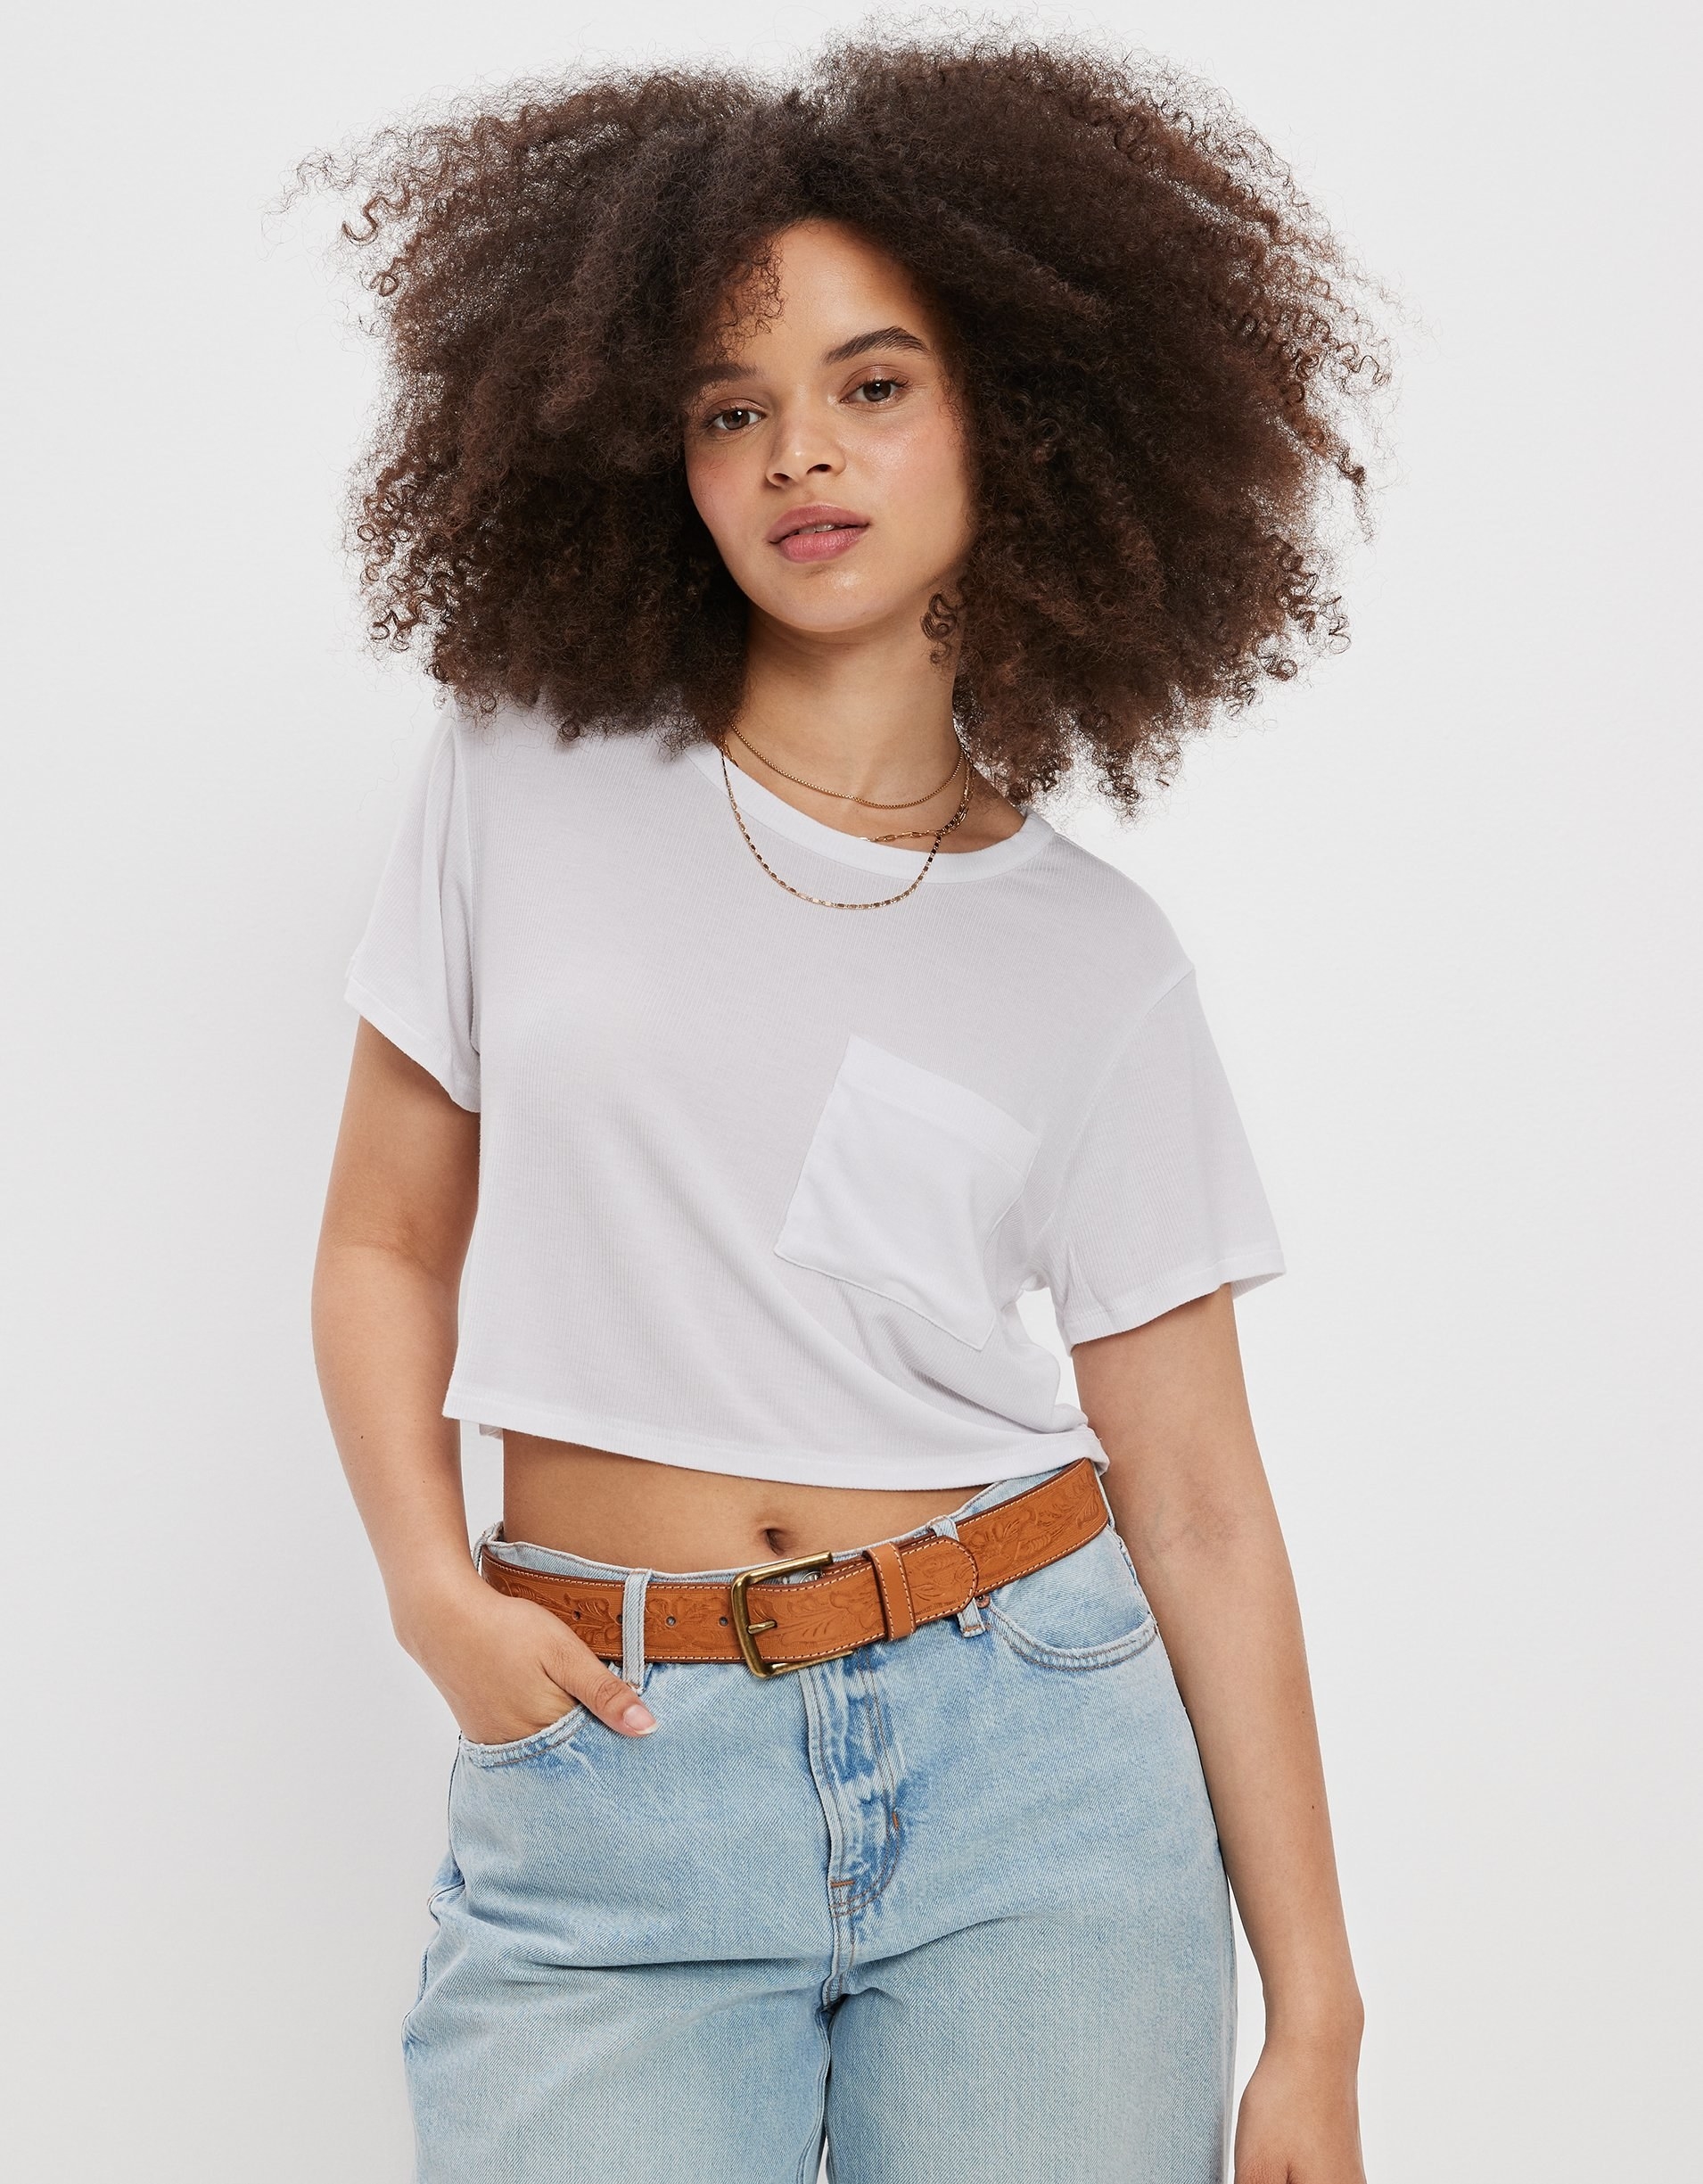 model in a the white cropped pocket tee